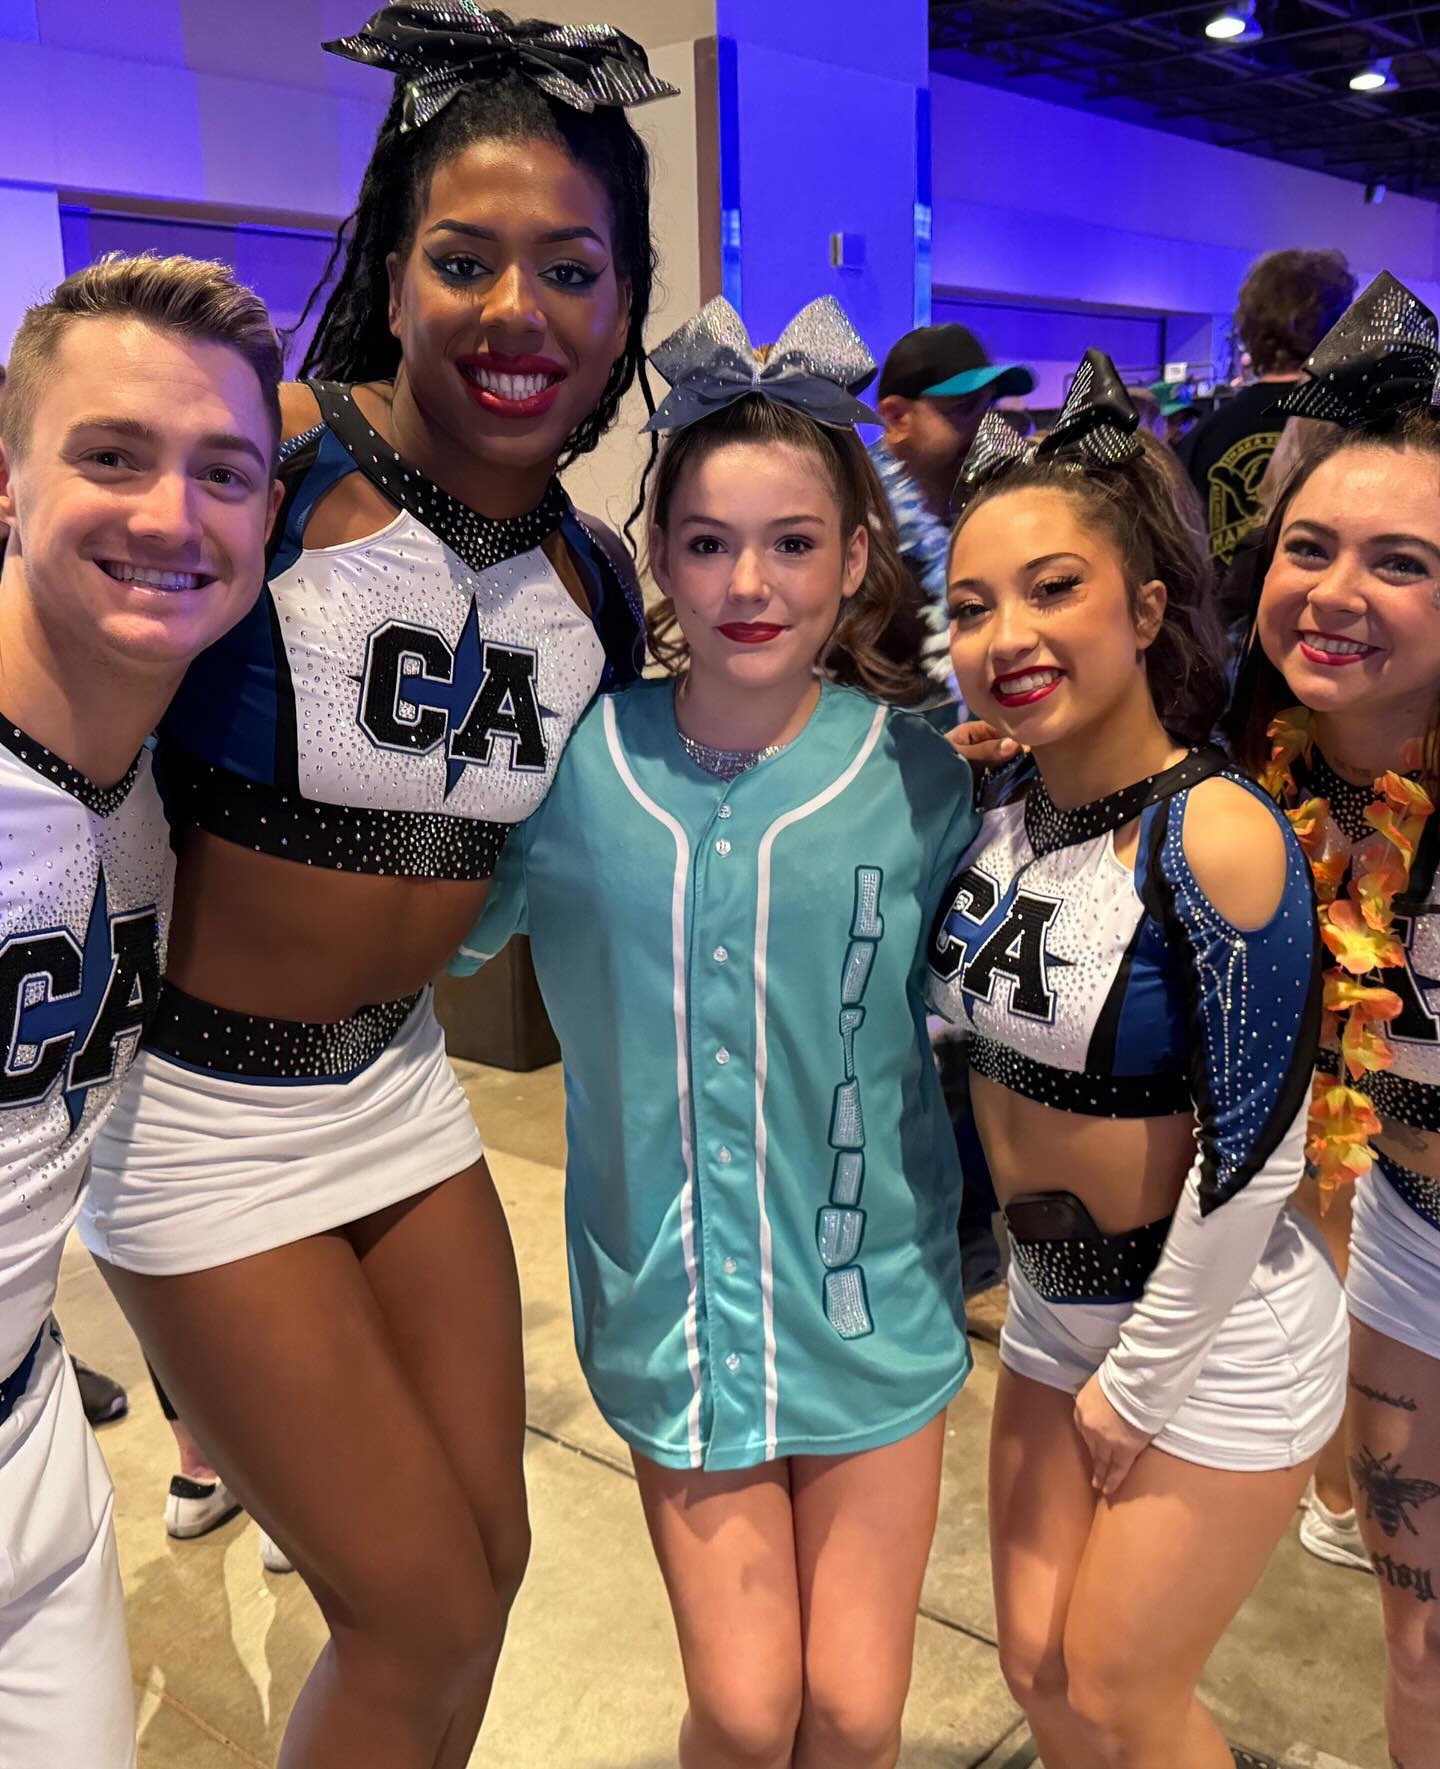 When your daughter gets to meet so many of her heroes in one weekend. 💕📣 a huge thank you to @__calismoed__ and their kind hearted athletes. 

#cheer #competition #aloha #phoenix #arizona #cheerleader #hero #thankyou #friends #daughter #pretty #bow #uniform #dance #love #life #cheerlife